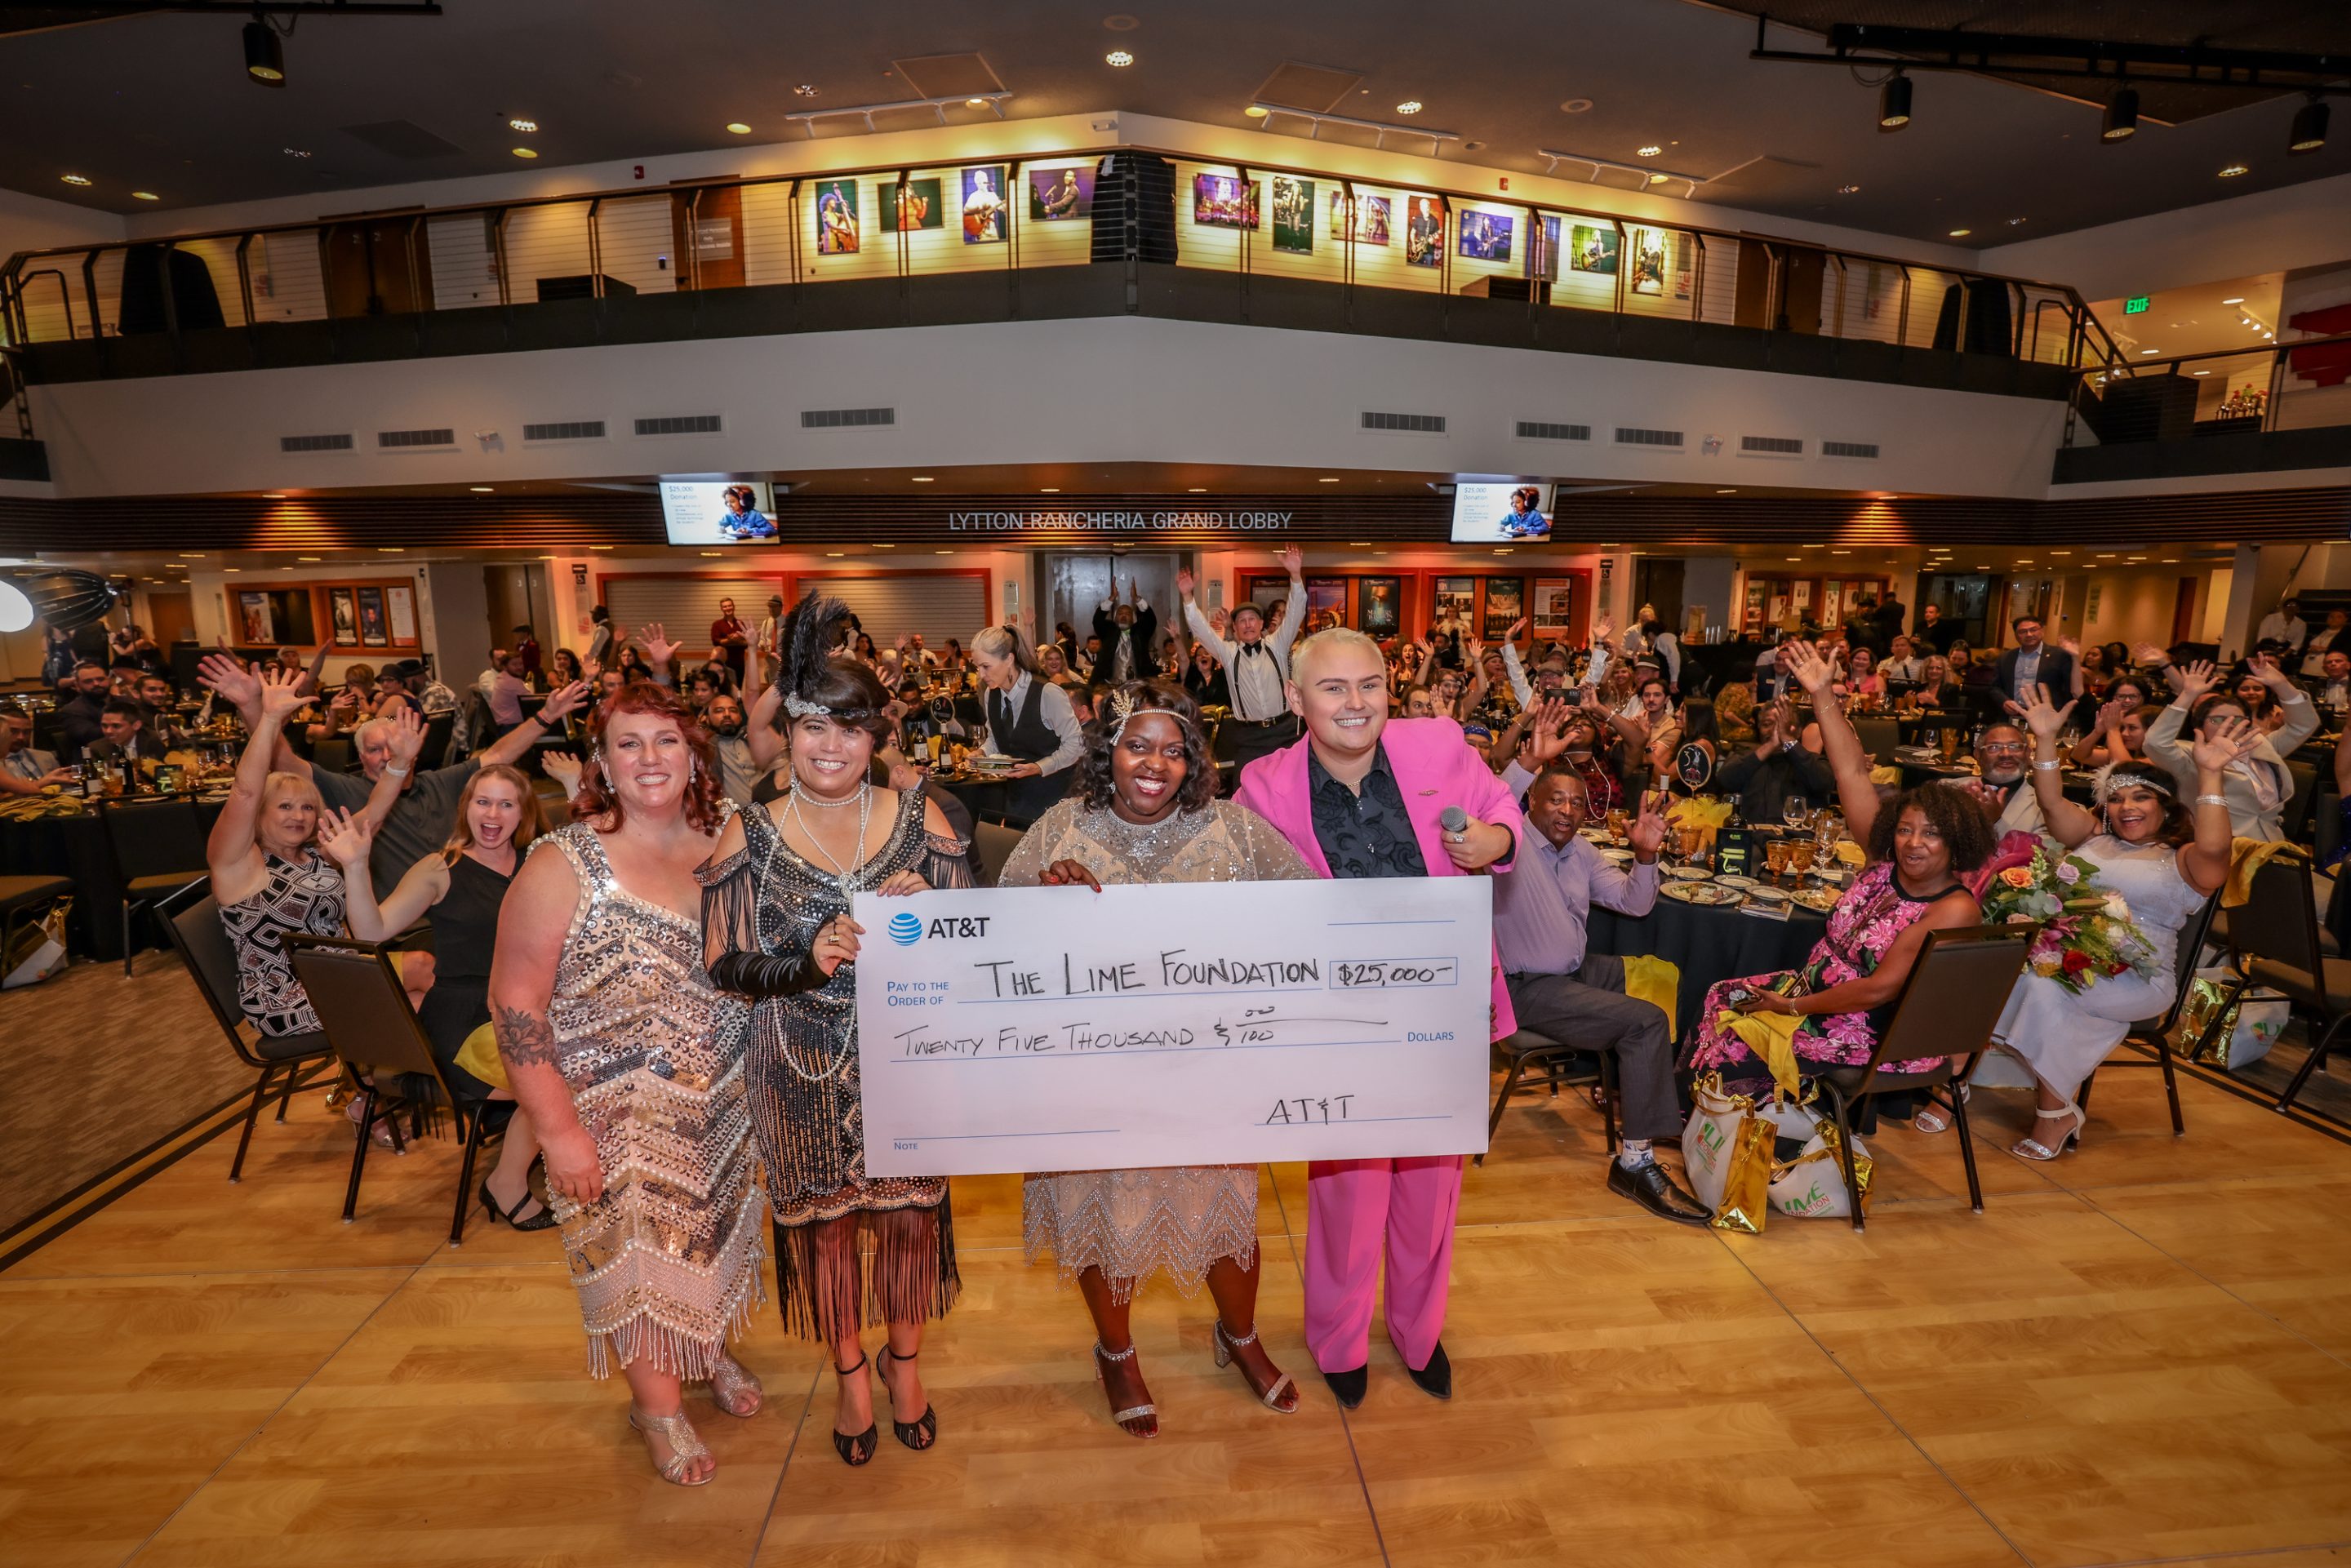 At a banquet, a group of people proudly hold up a check from the LIME Foundation of Santa Rosa.